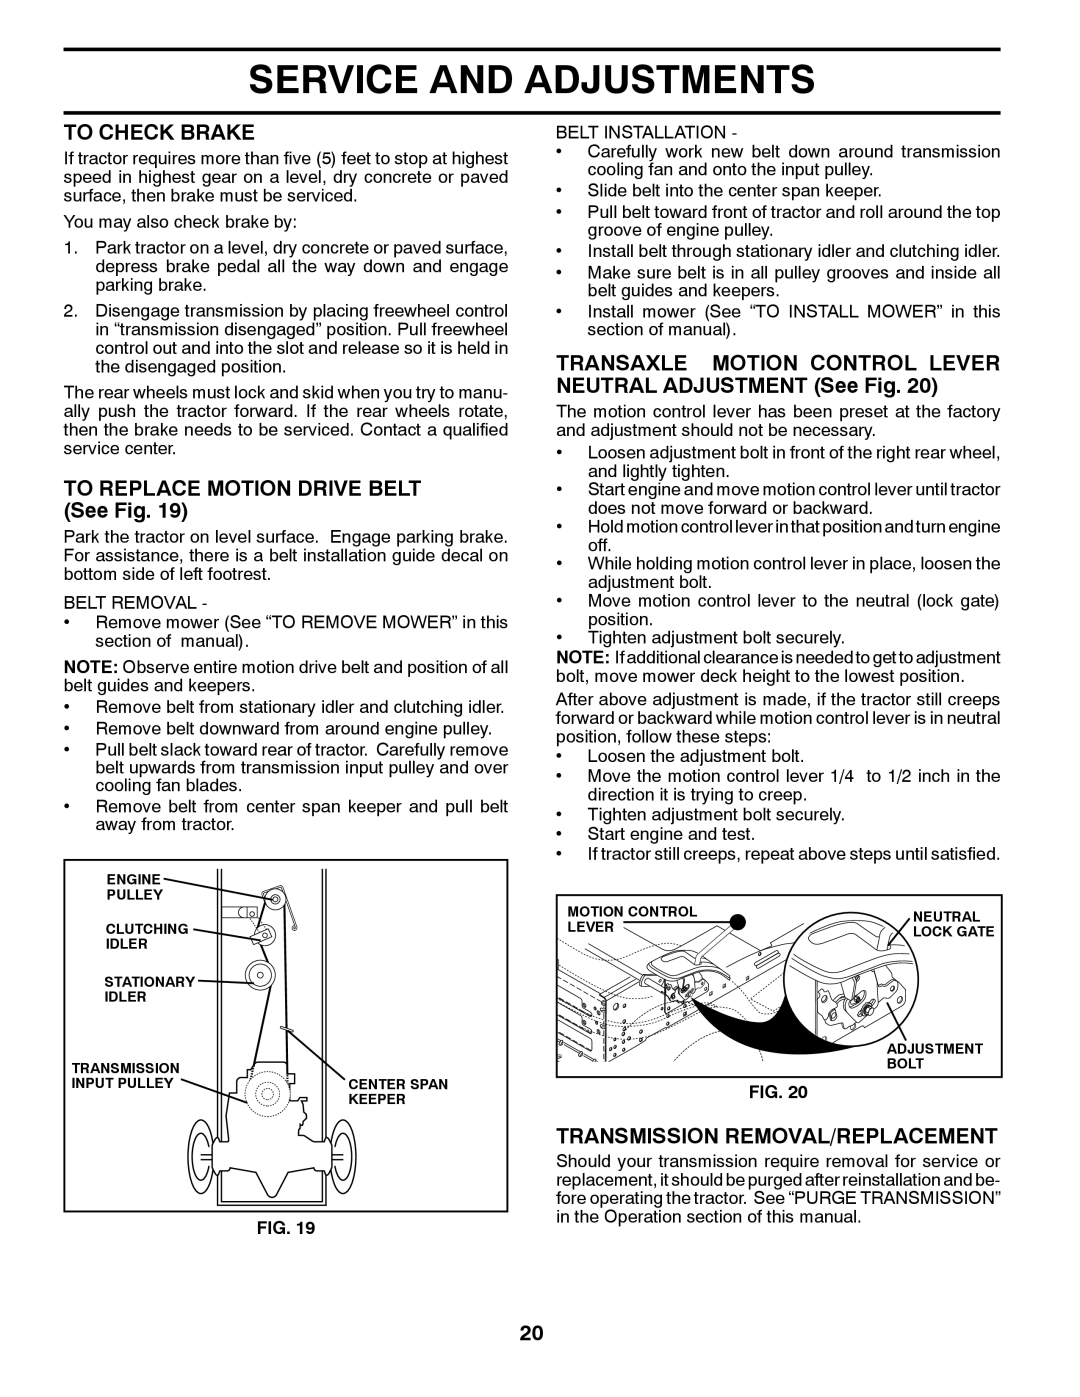 Poulan 96012008600 manual To Check Brake, TO REPLACE MOTION DRIVE BELT See Fig, Transmission Removal/Replacement 